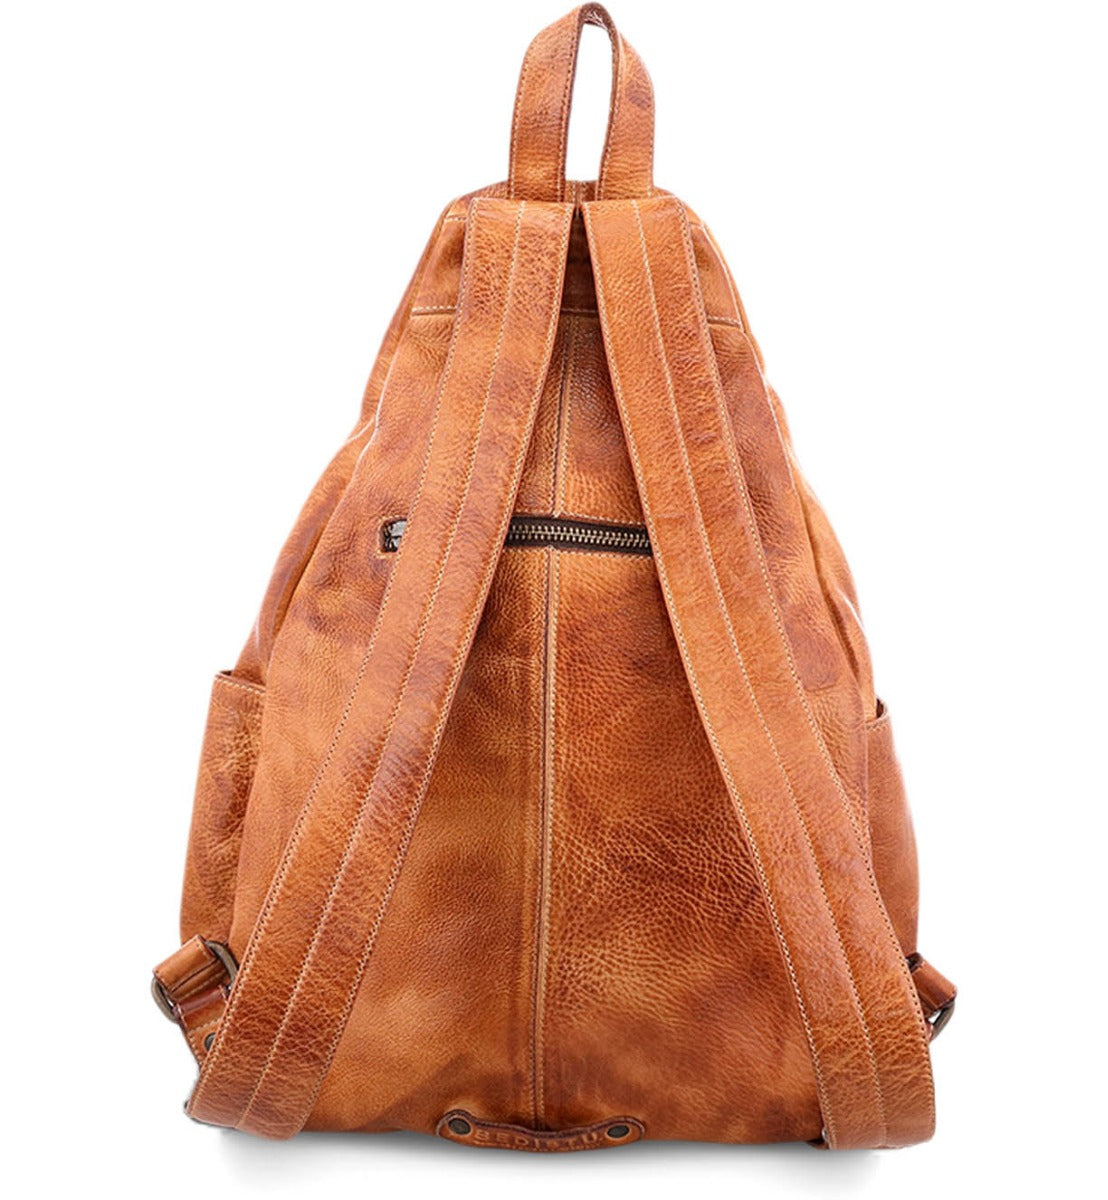 A Tommie leather backpack by Bed Stu on a white background.